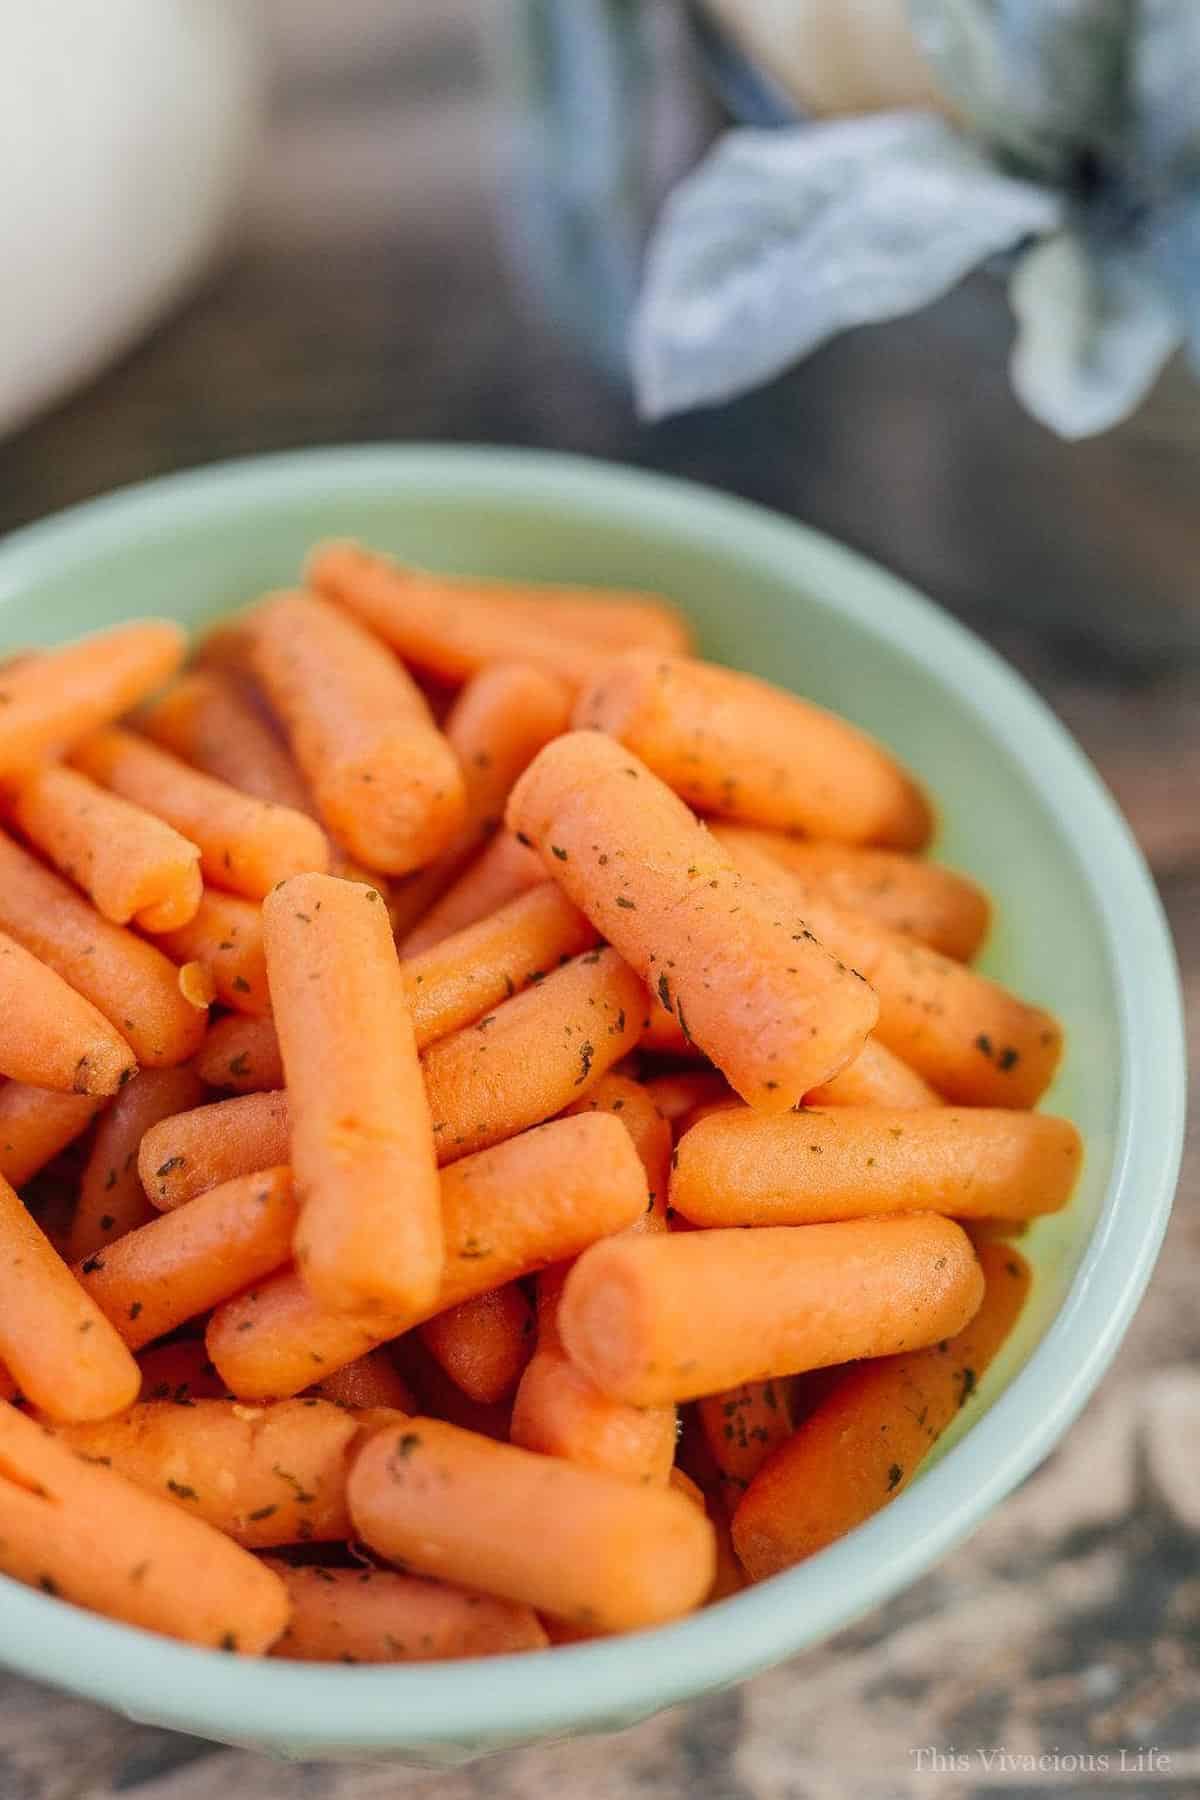 Buttered carrots in a jadeite bowl